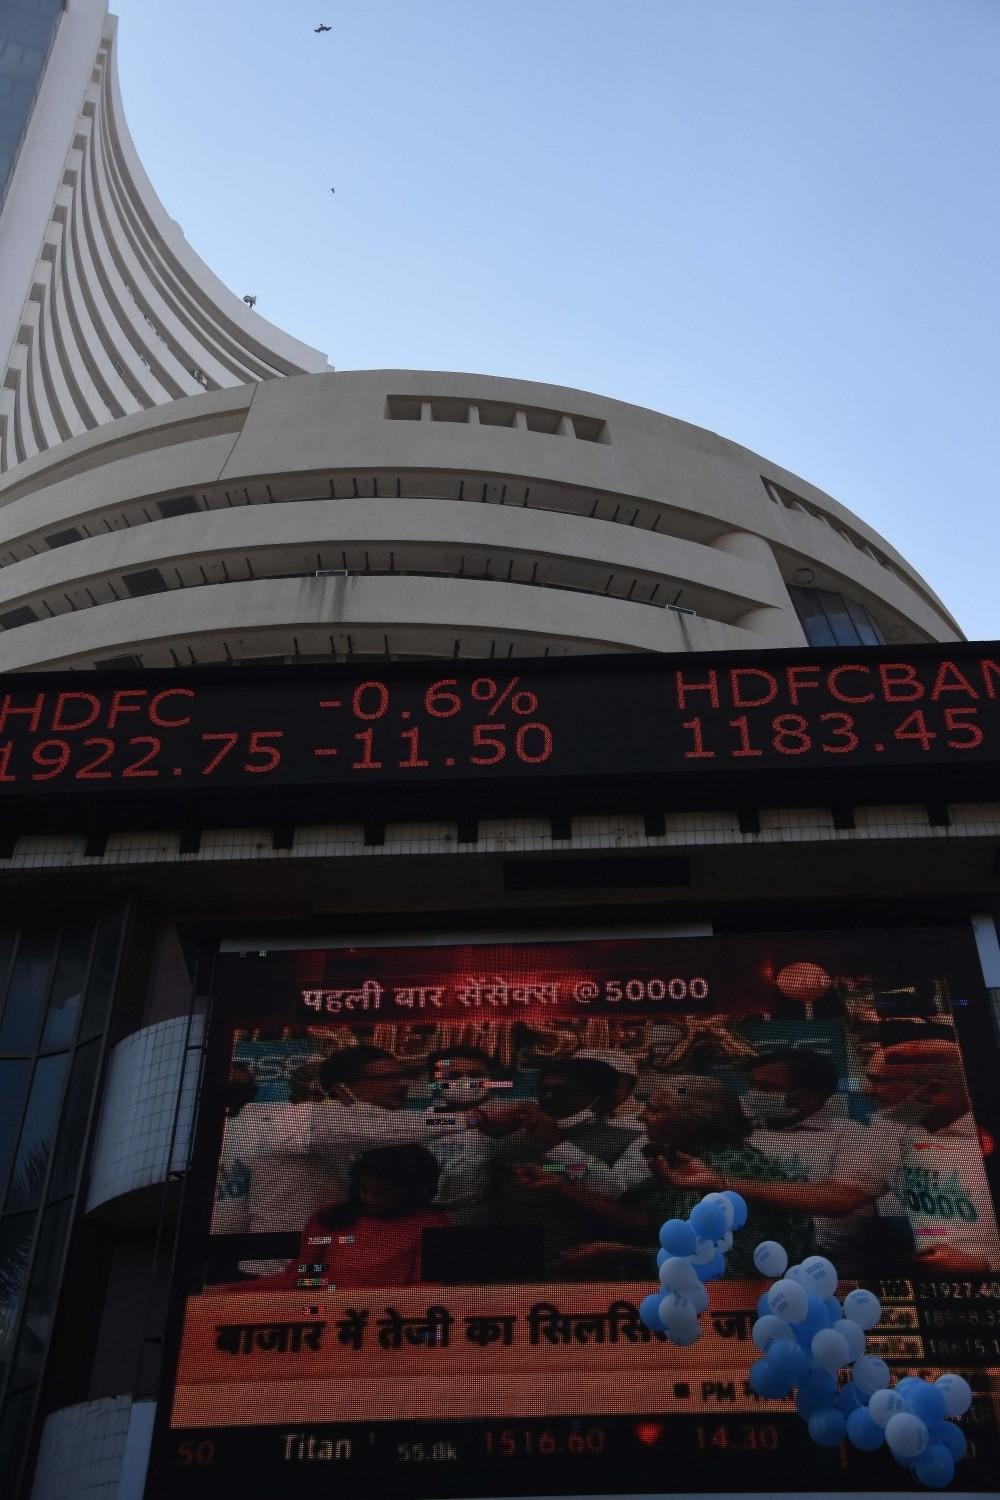 The Weekend Leader - Nifty hits record high, metal stocks surge